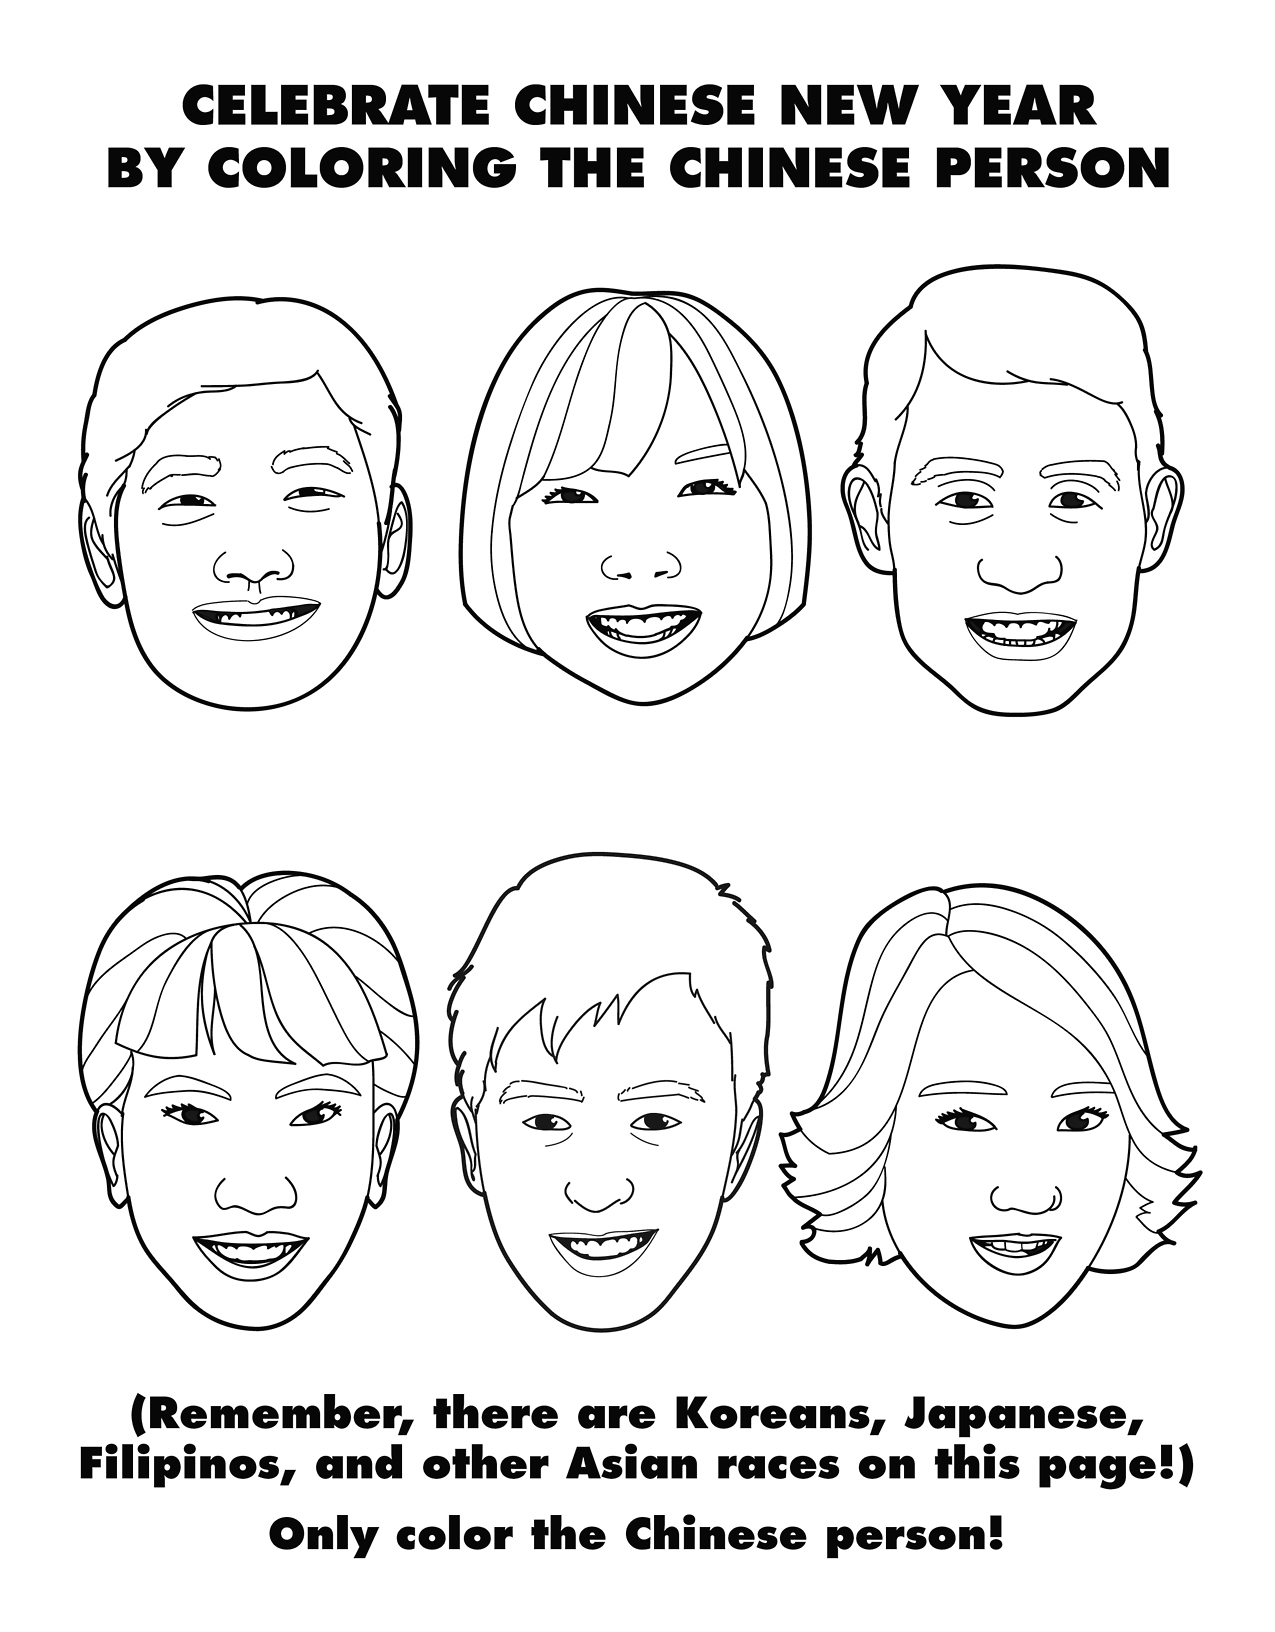 colouring for grown ups - Celebrate Chinese New Year By Coloring The Chinese Person Remember, there are Koreans, Japanese, Filipinos, and other Asian races on this page! Only color the Chinese person!